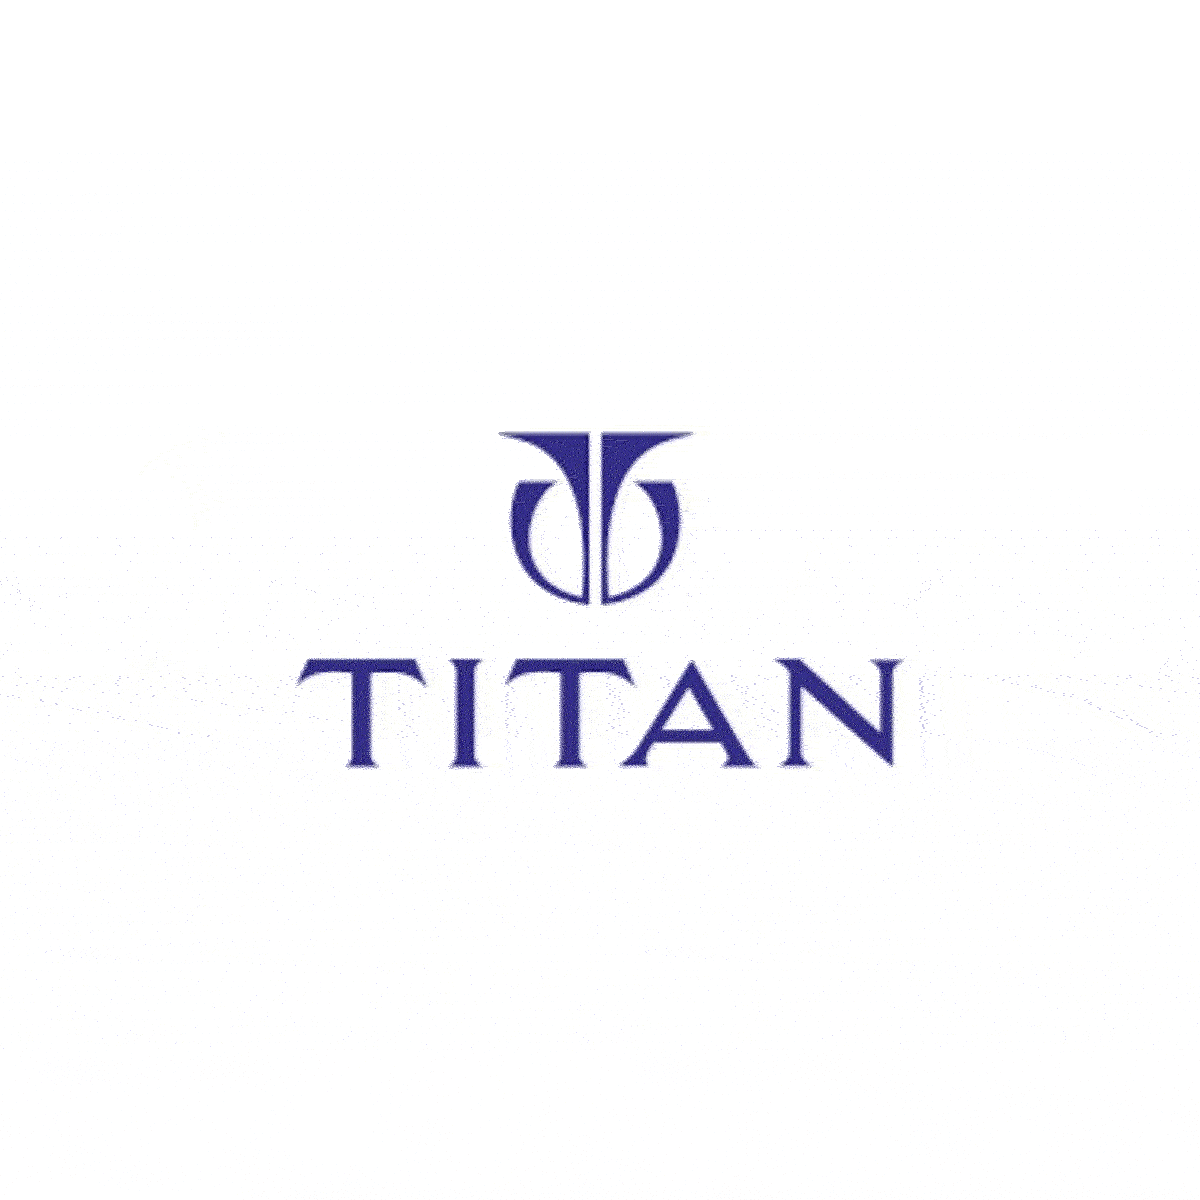 Titan Q1 Preview: A tepid quarter on the cards with muted profitability 